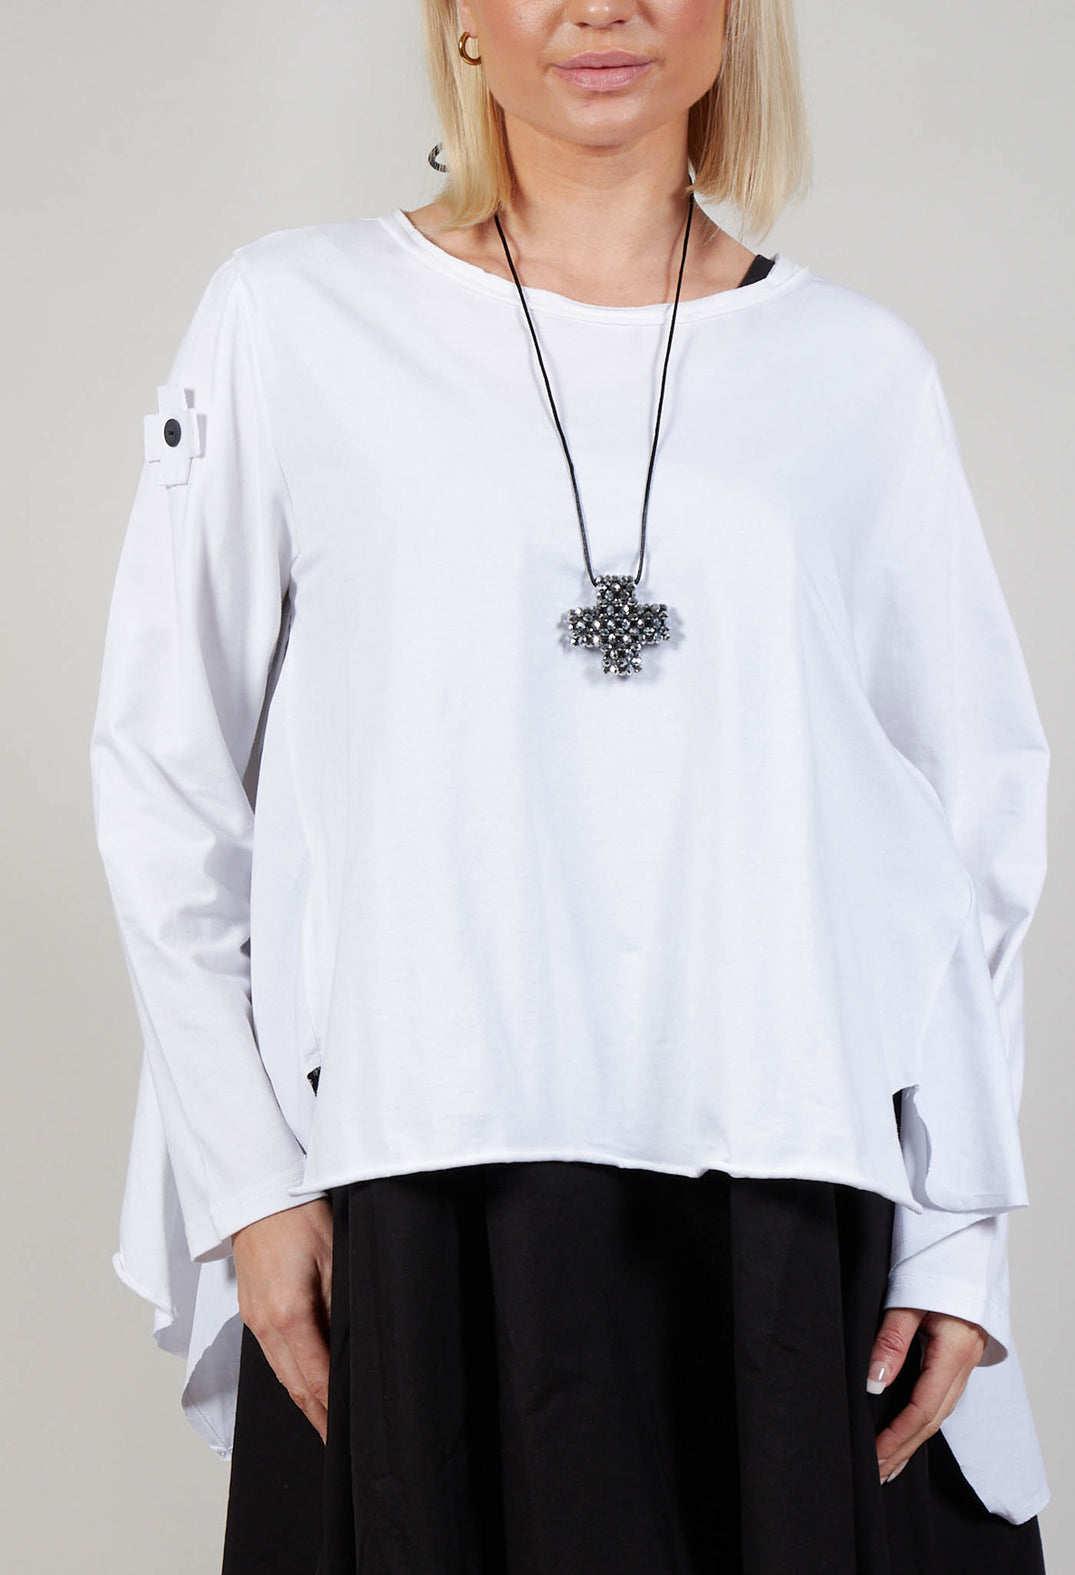 Long Sleeve Loose Fit Jersey T Shirt in White